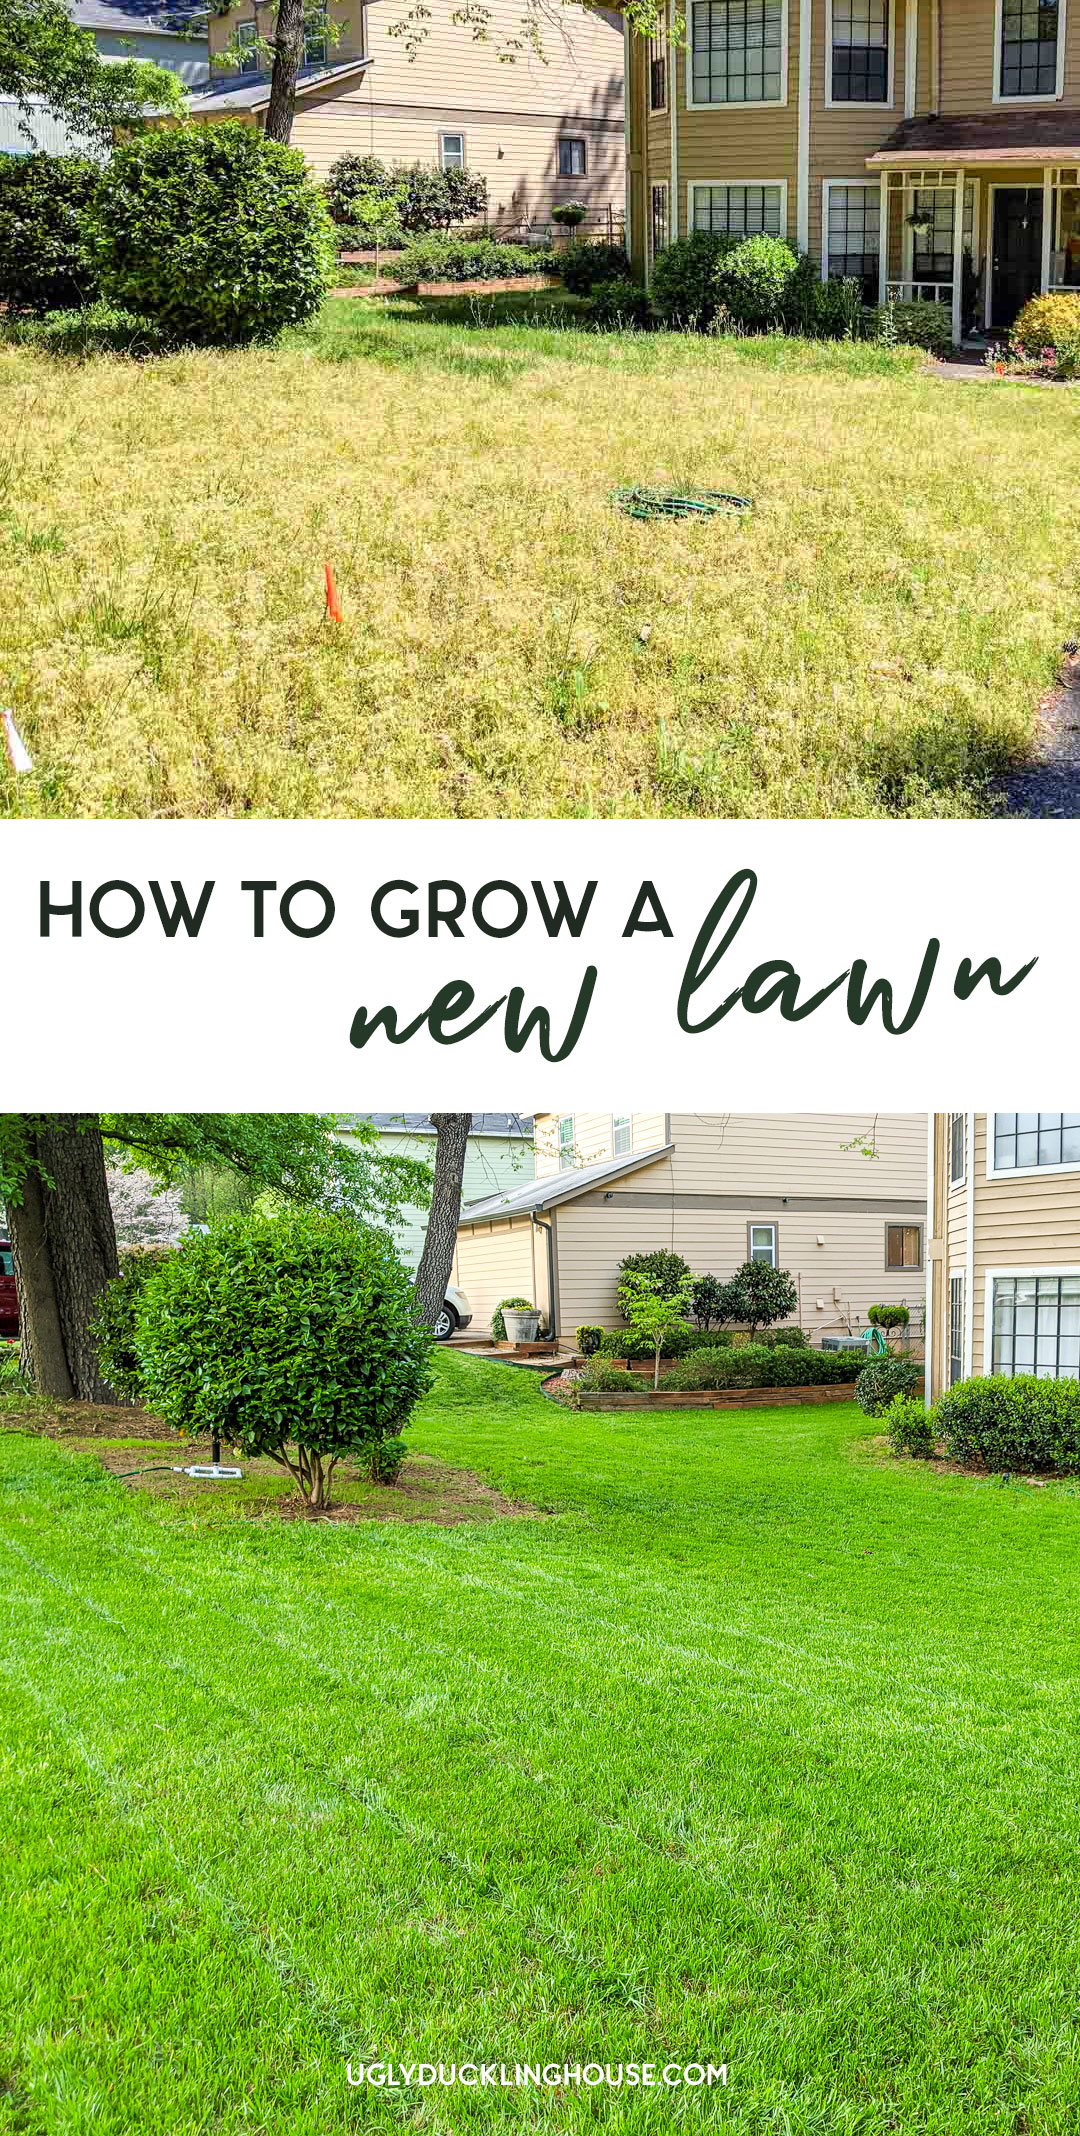 How to grow a new lawn